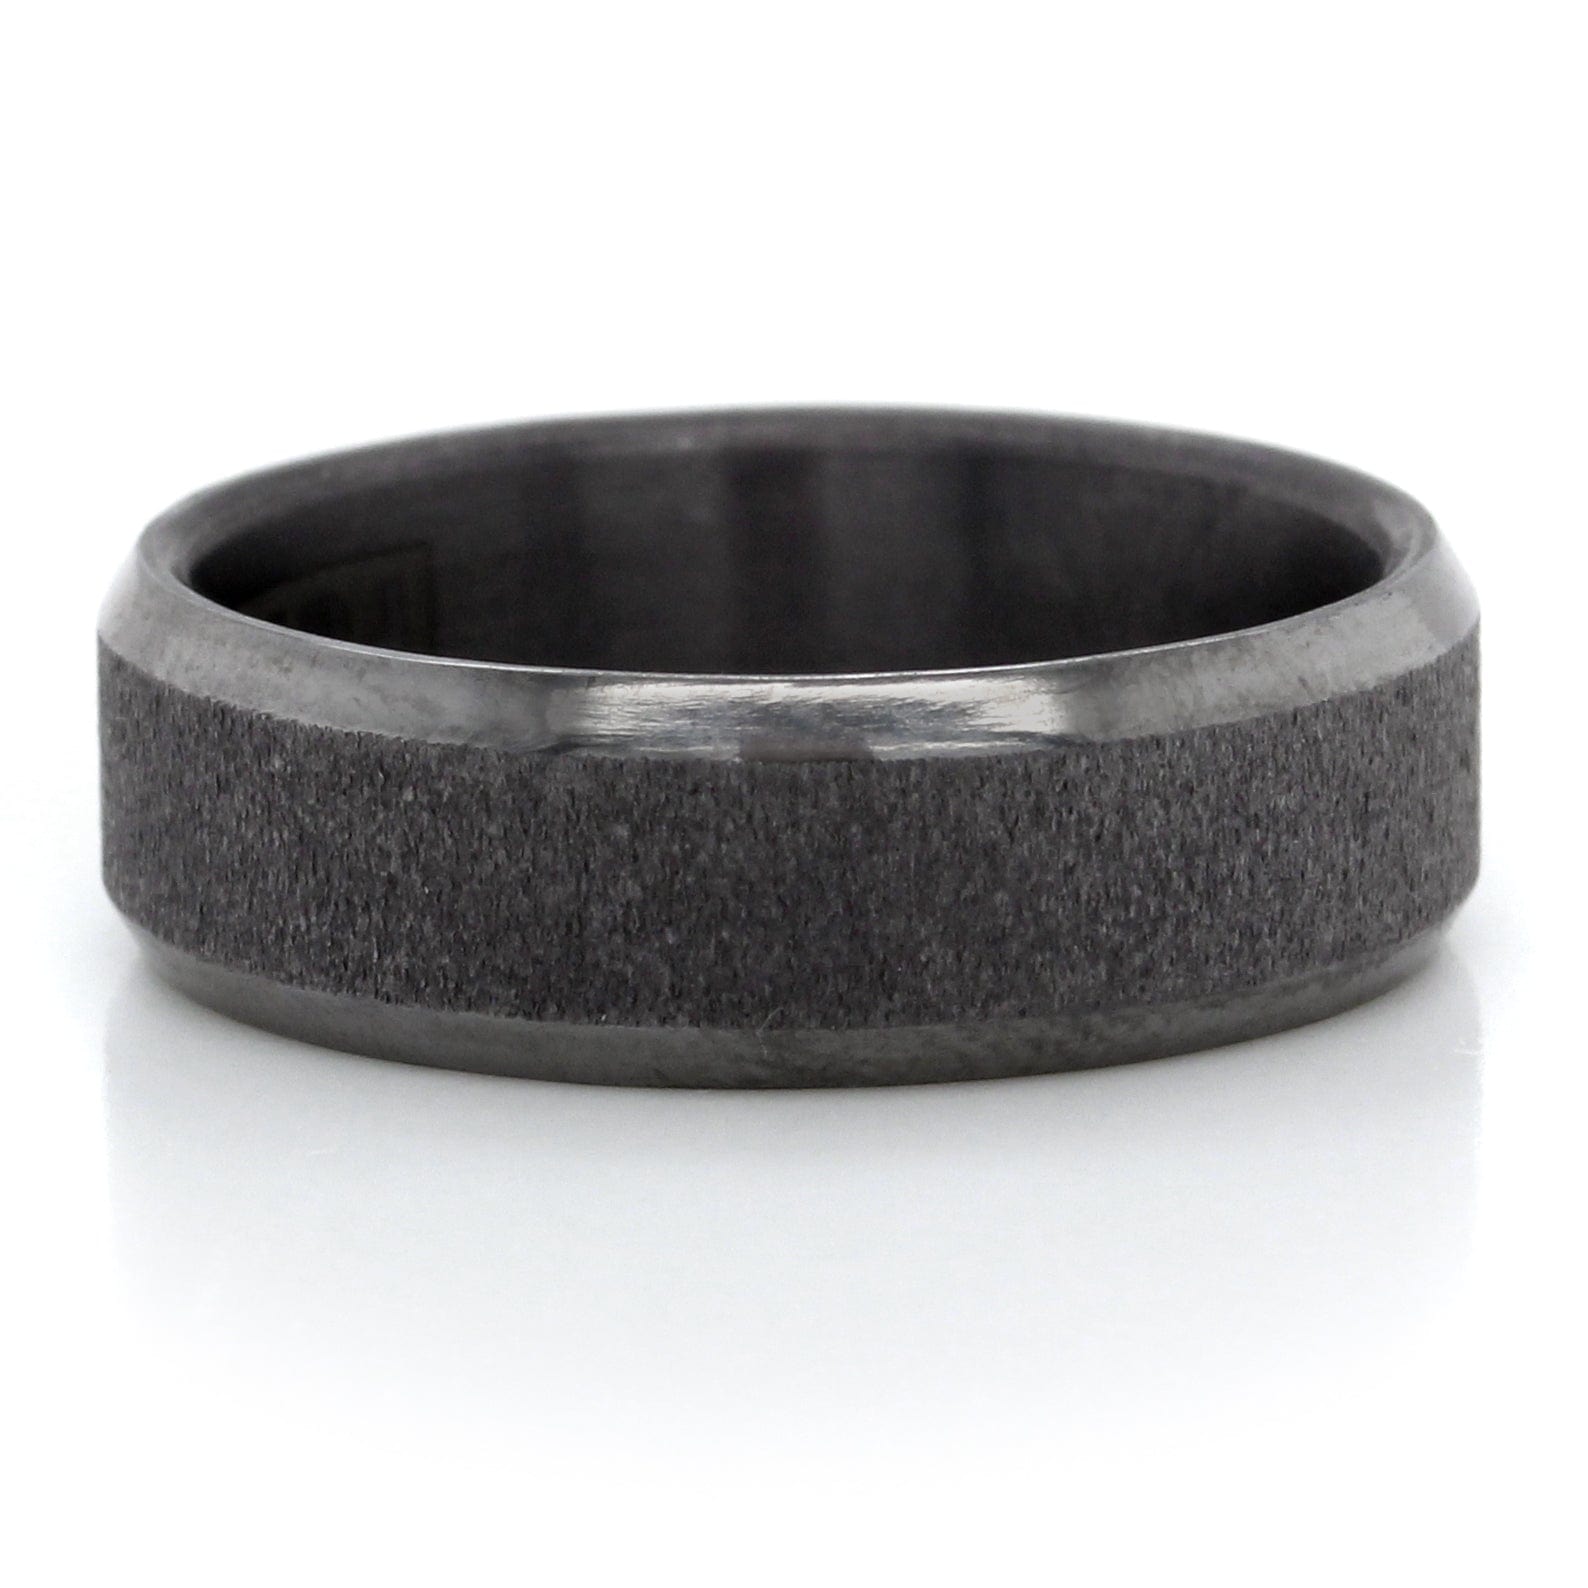 Grey Tantalum Band with Wired Center and High Polish Bevel Edges